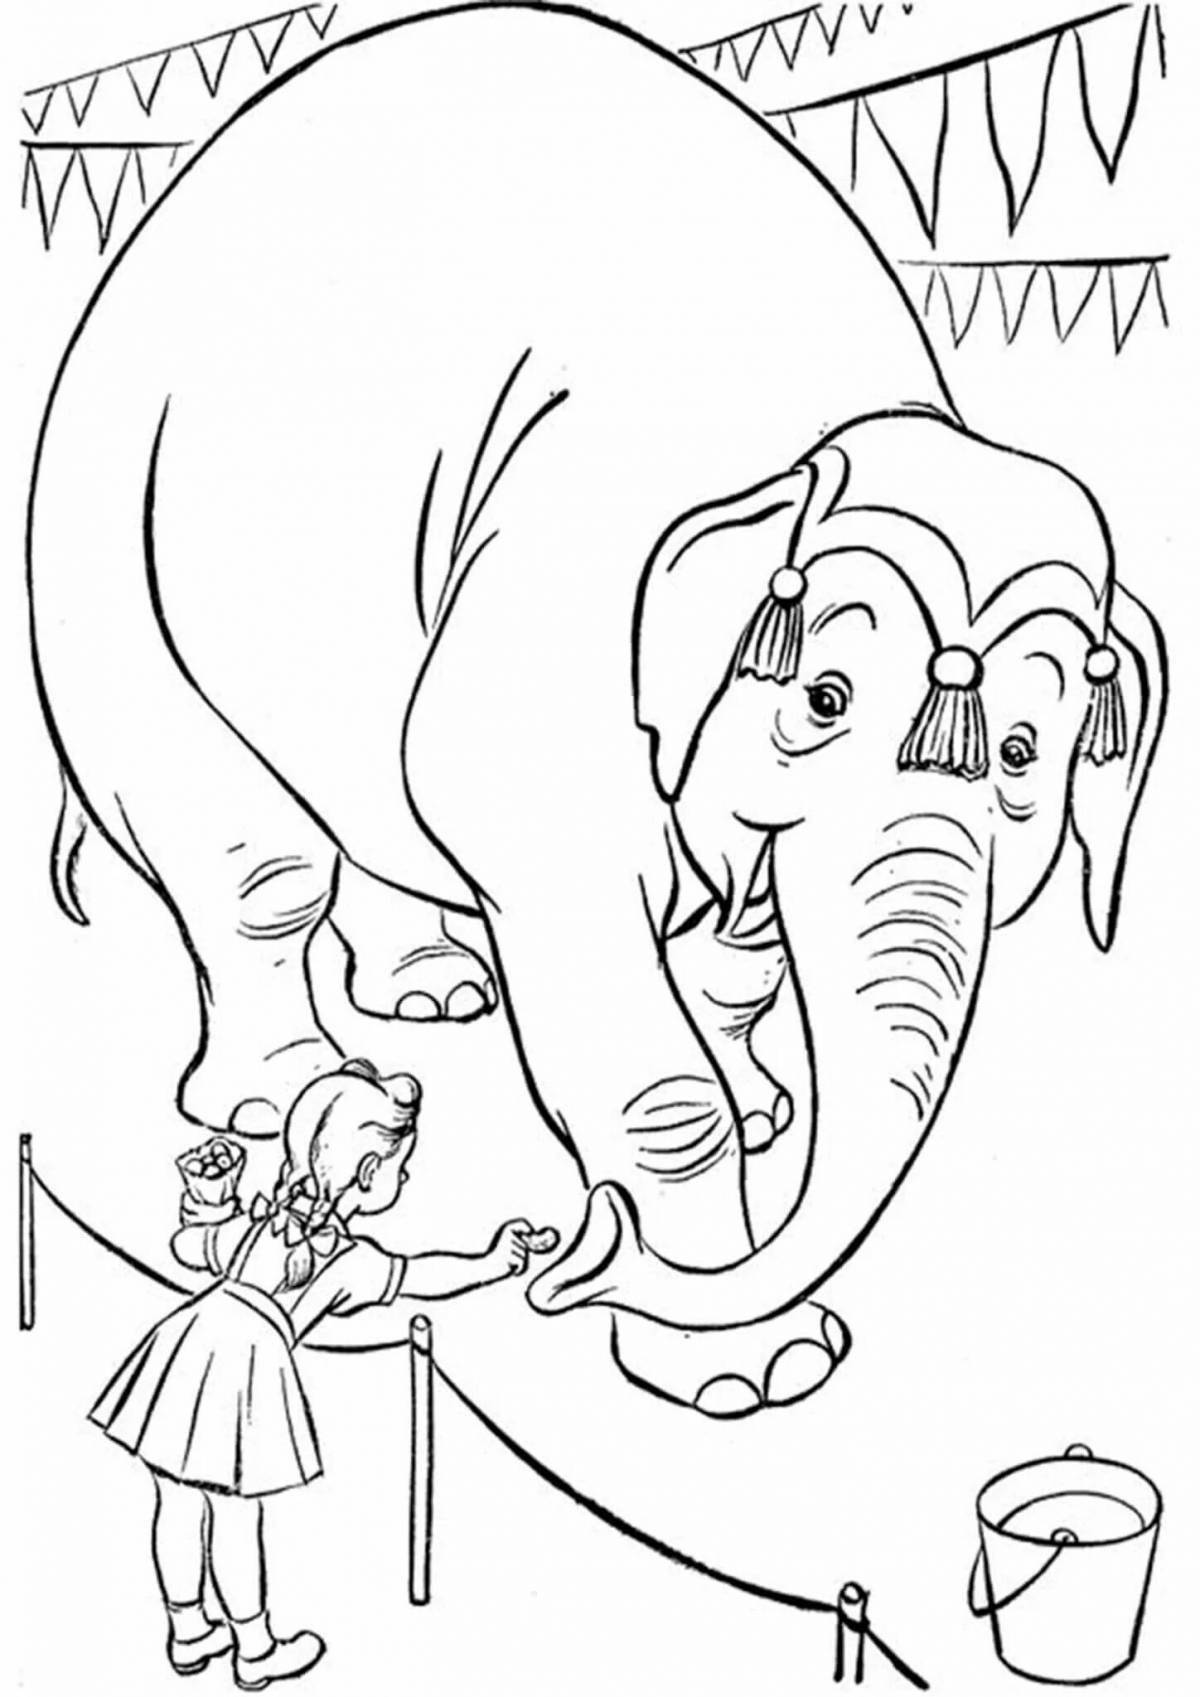 Coloring page magnificent circus elephant